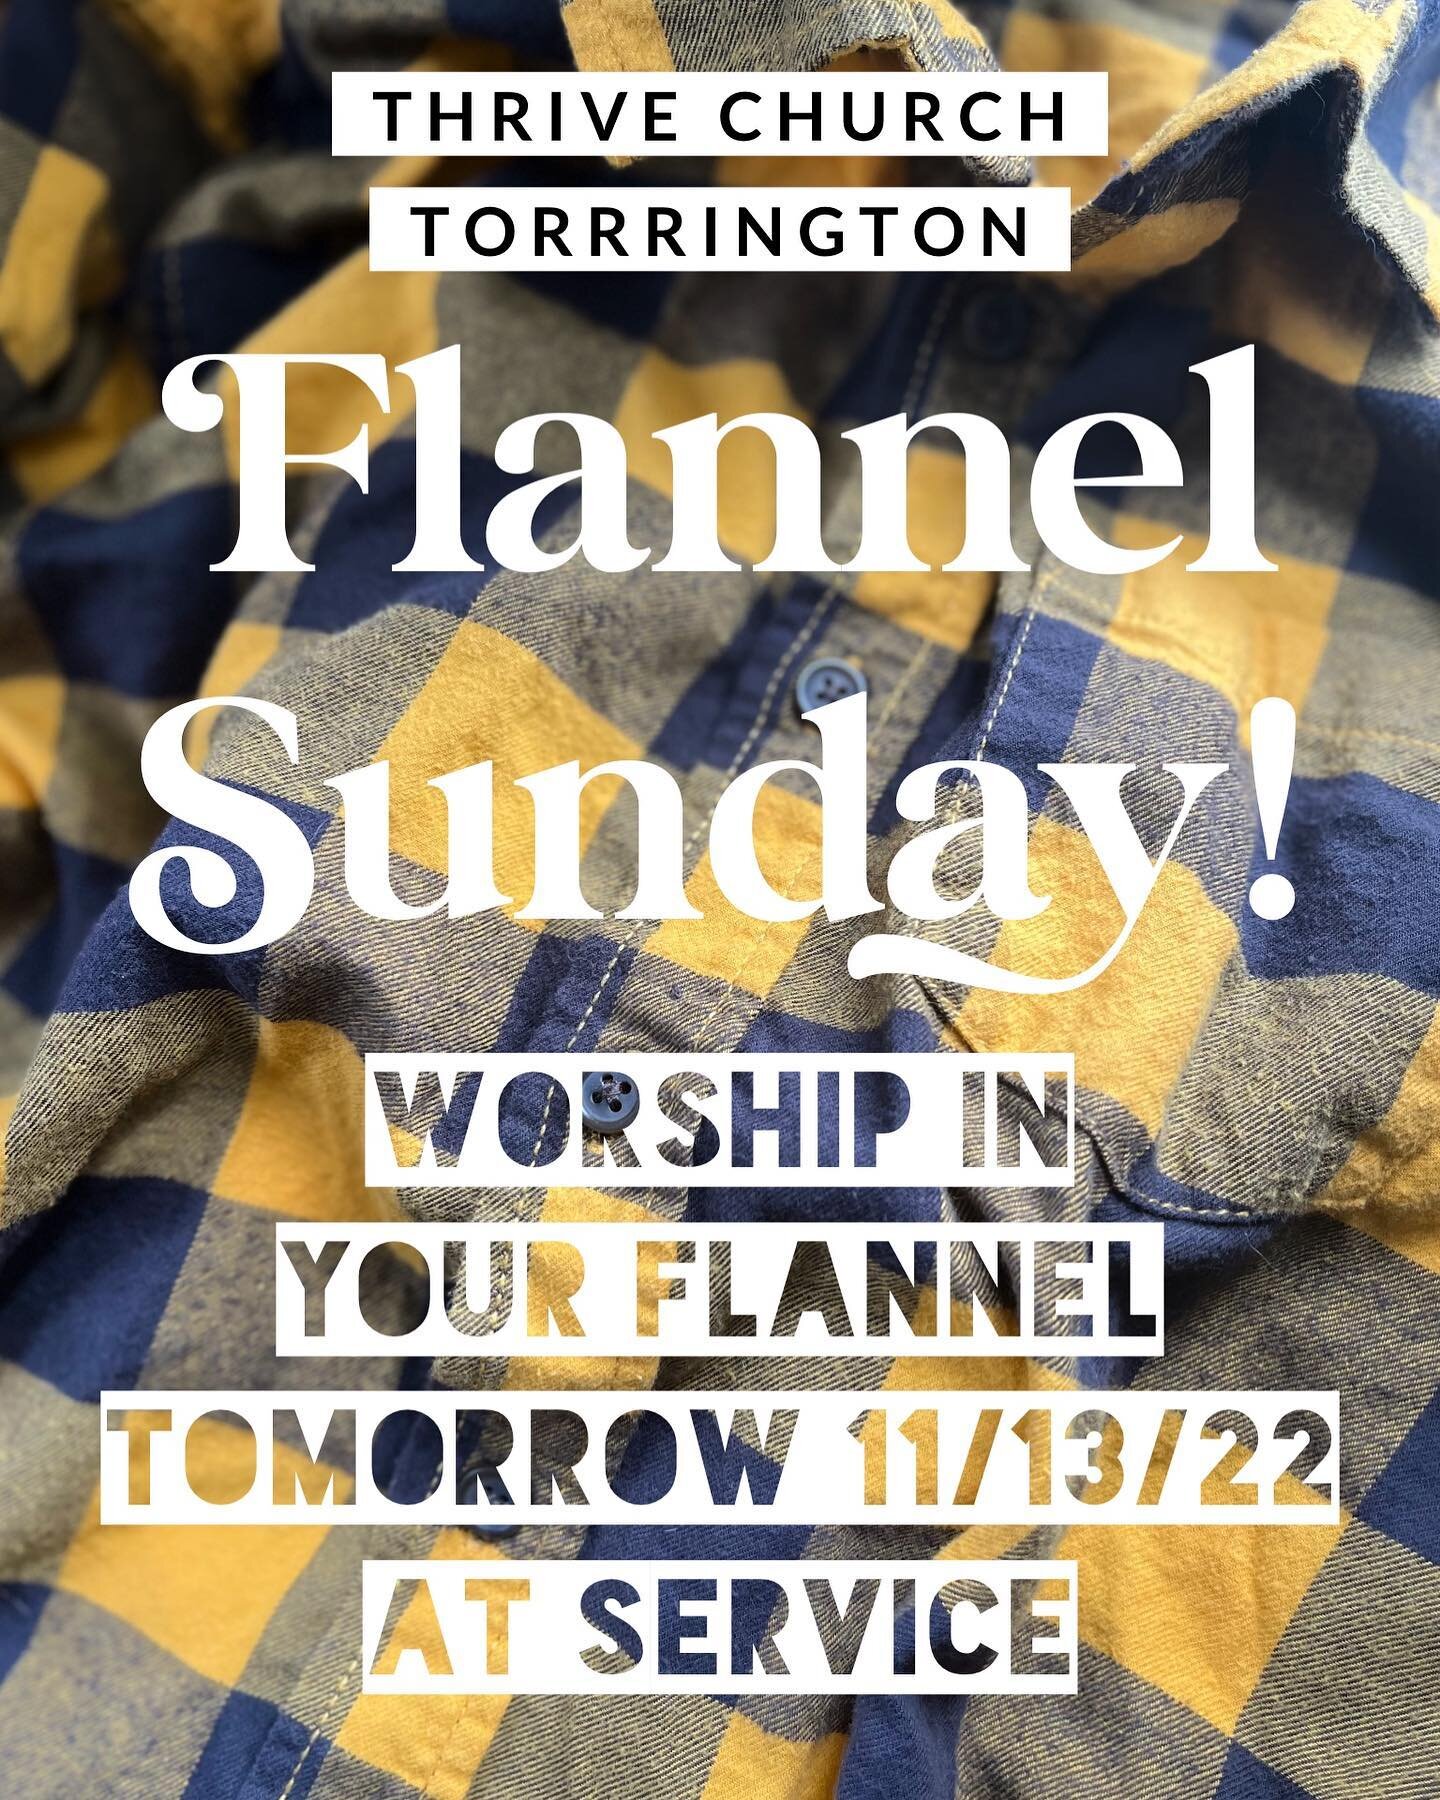 Tomorrow is our annual Flannel Sunday! So come to church in your best flannel and be ready to worship and fellowship with the family! Service starts at 10am. 1701 E Main St Torrington CT #flannelsunday #thrivechurchtorrington #thrivechurchterryville 